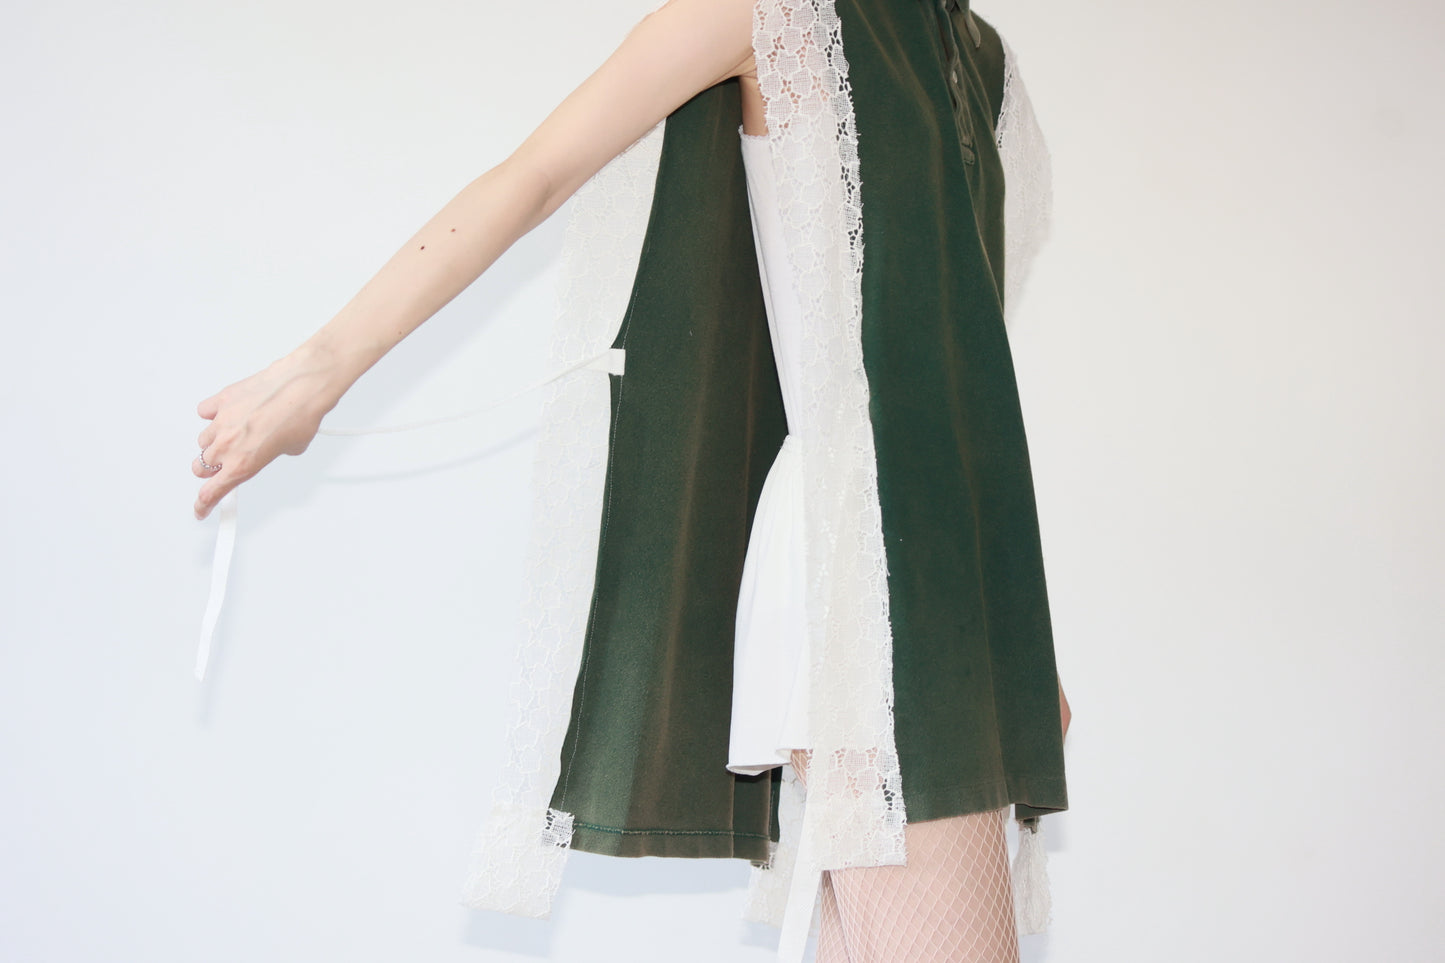 POTTOxUDW UP-CYCLED PIGMENT-DYED GILET, MOSS-GREEN, LACE